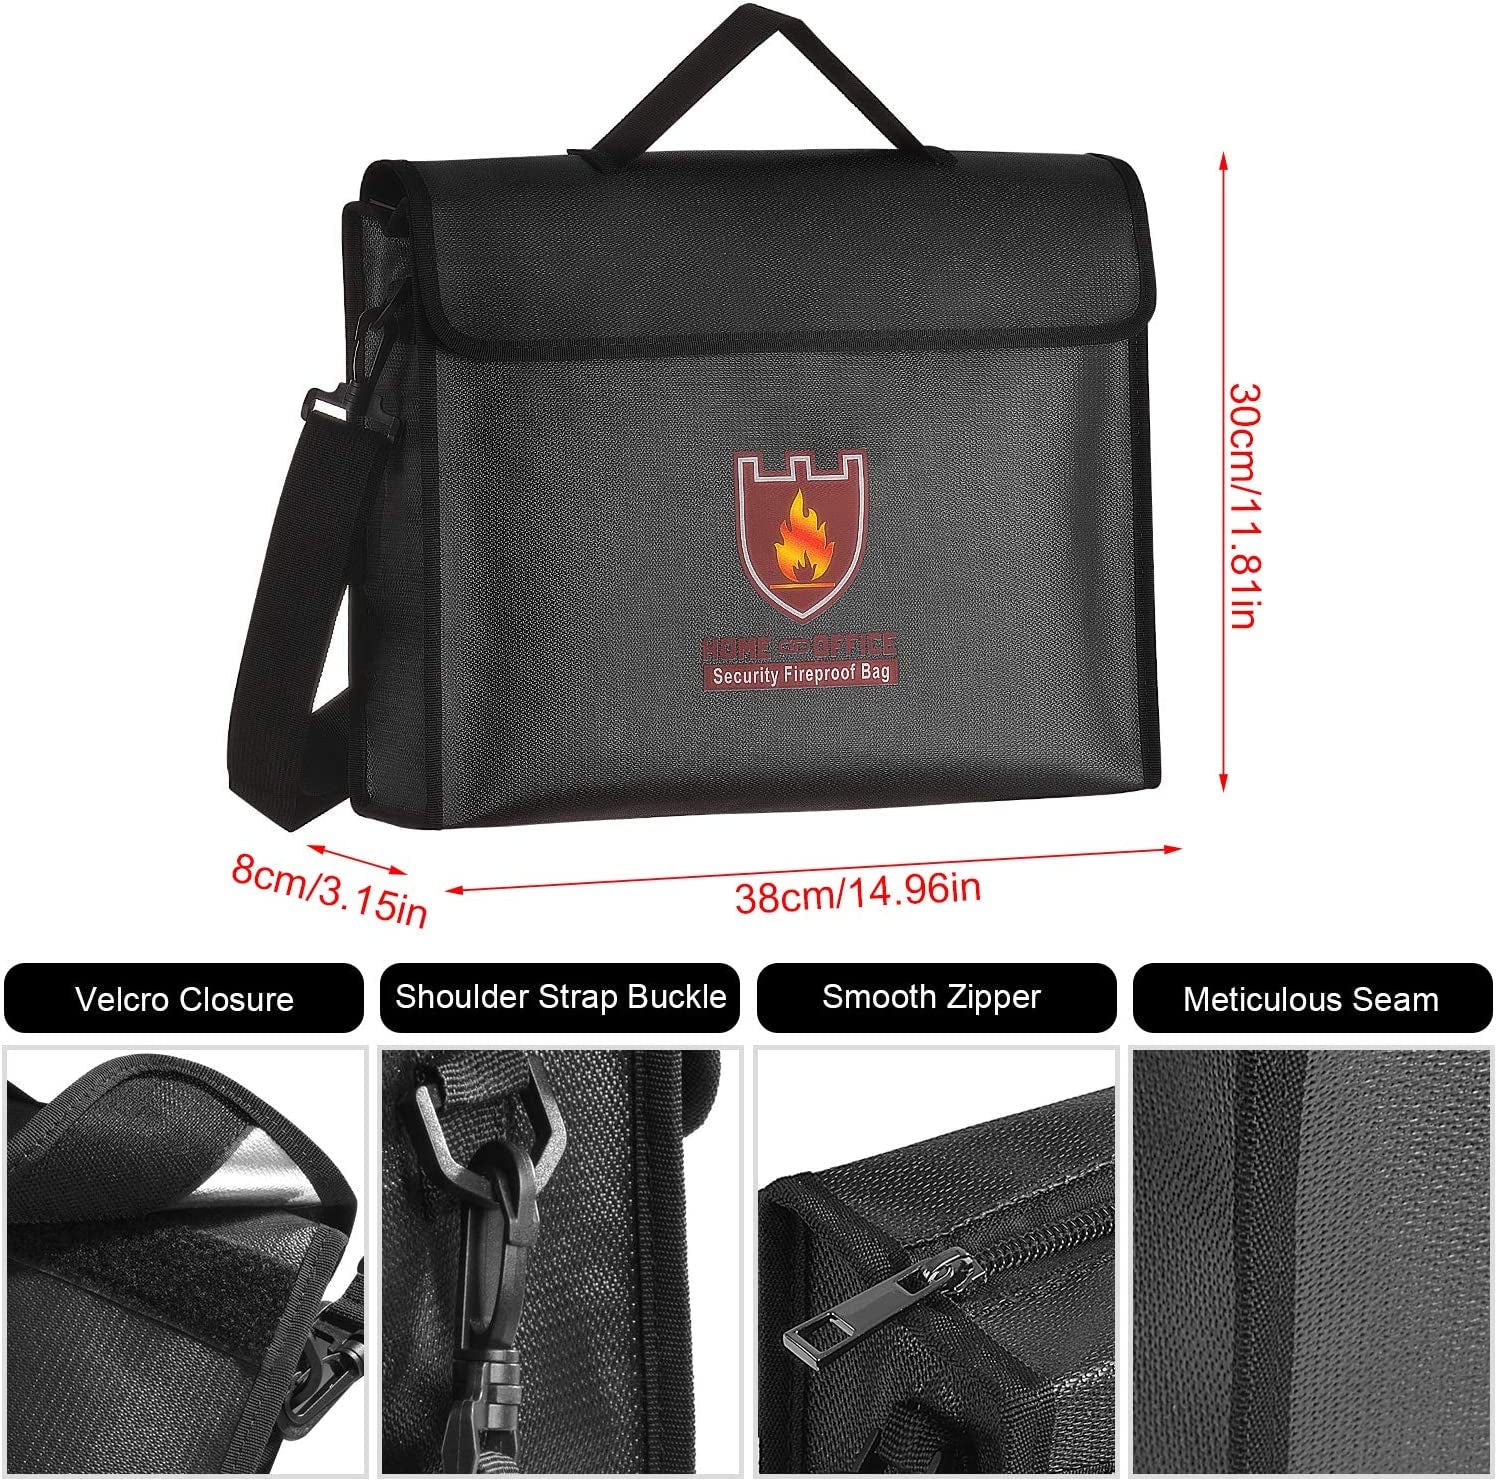 XCELLENT GLOBAL XG, Fireproof Document Bag with Shoulder Strap, Fire and Water Resistant Pouch Money and Document Safe Bag with Handle, Portable Security Closure Fire Zipper Bag for Money, Photos, Jewelry, Passport